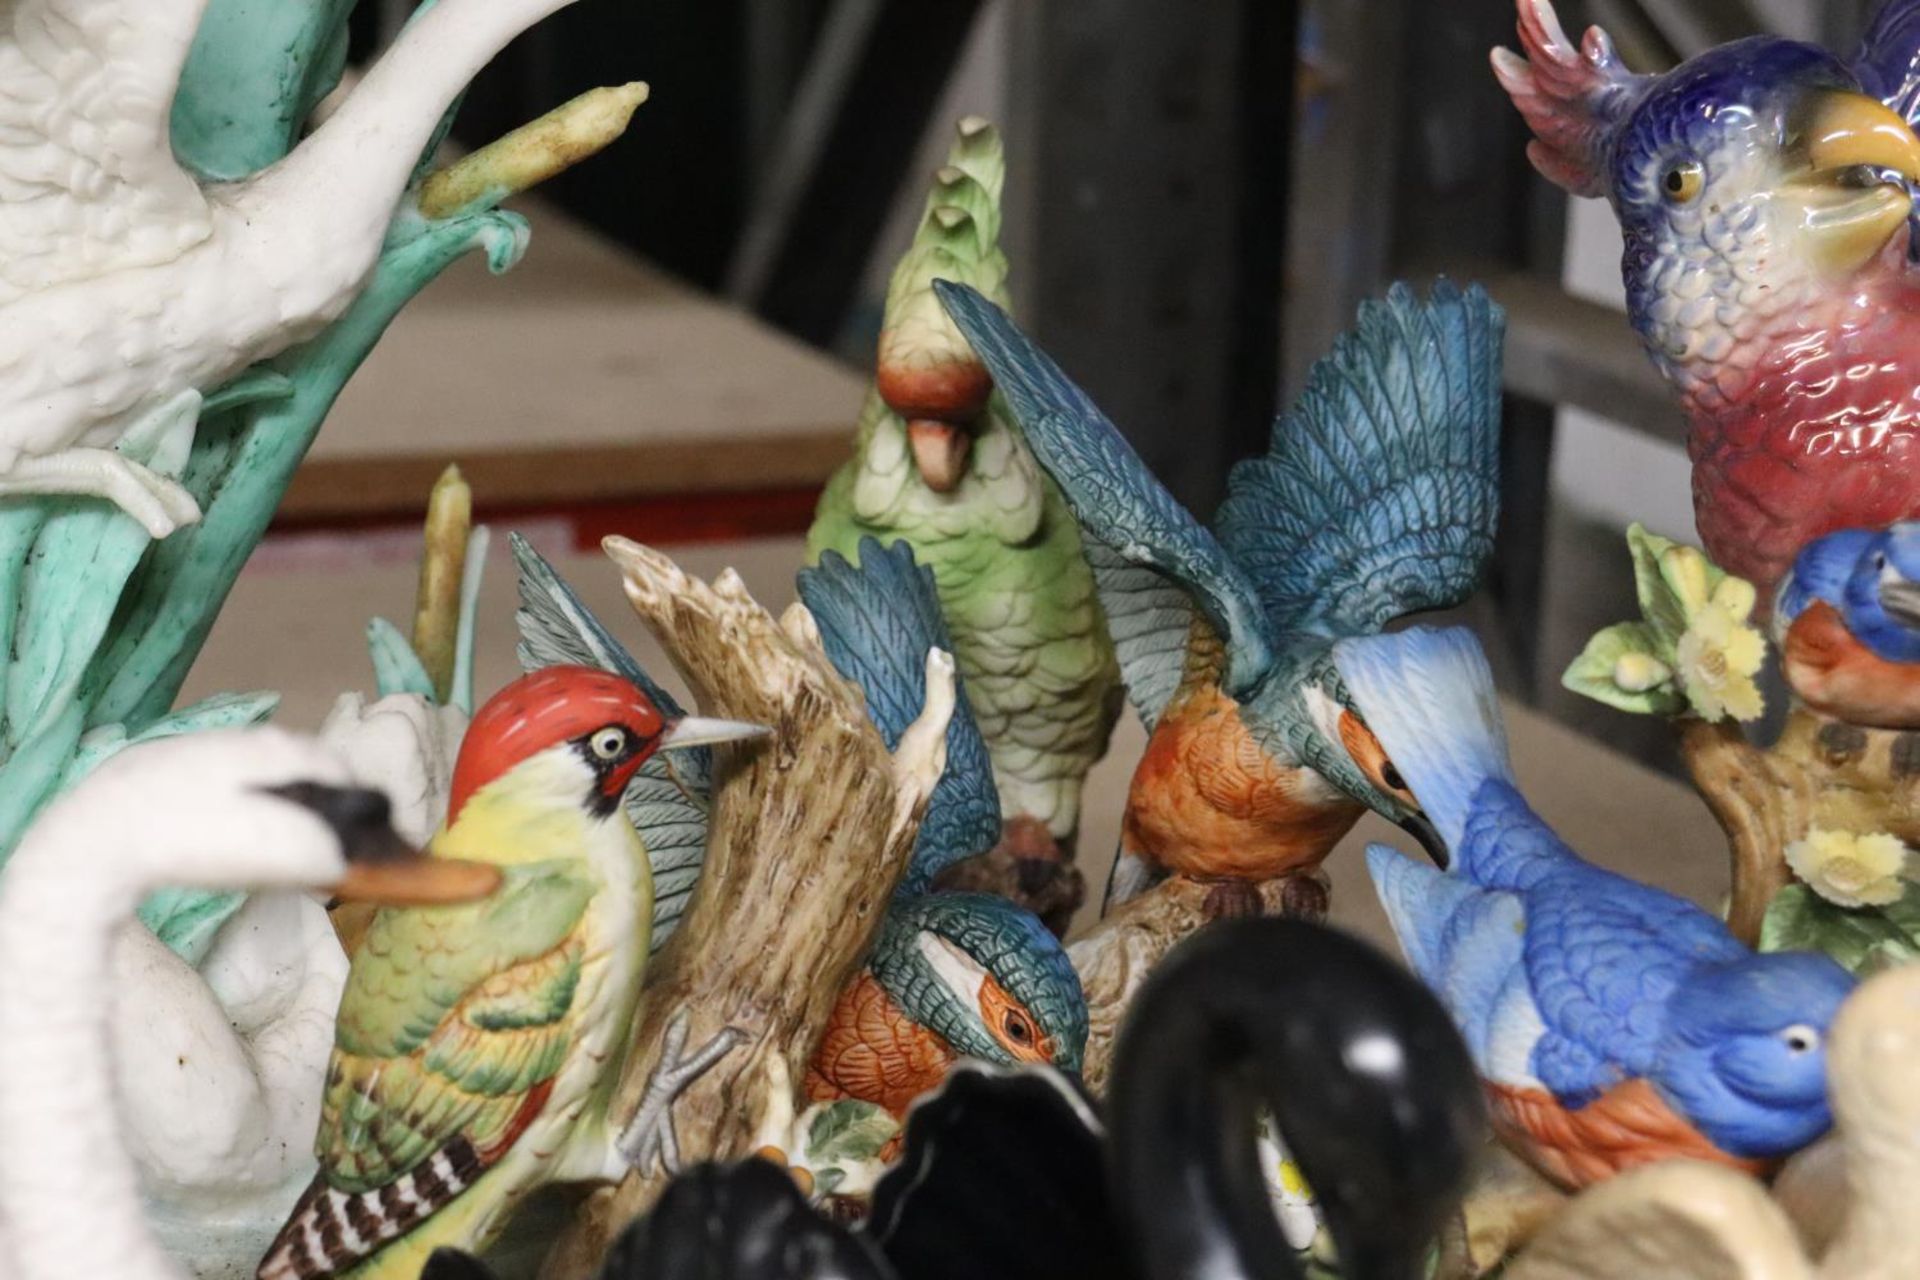 A COLLECTION OF BIRD FIGURINES TO INCLUDE SWANS, A PARROT, WOODPECKER, ETC - Bild 6 aus 6